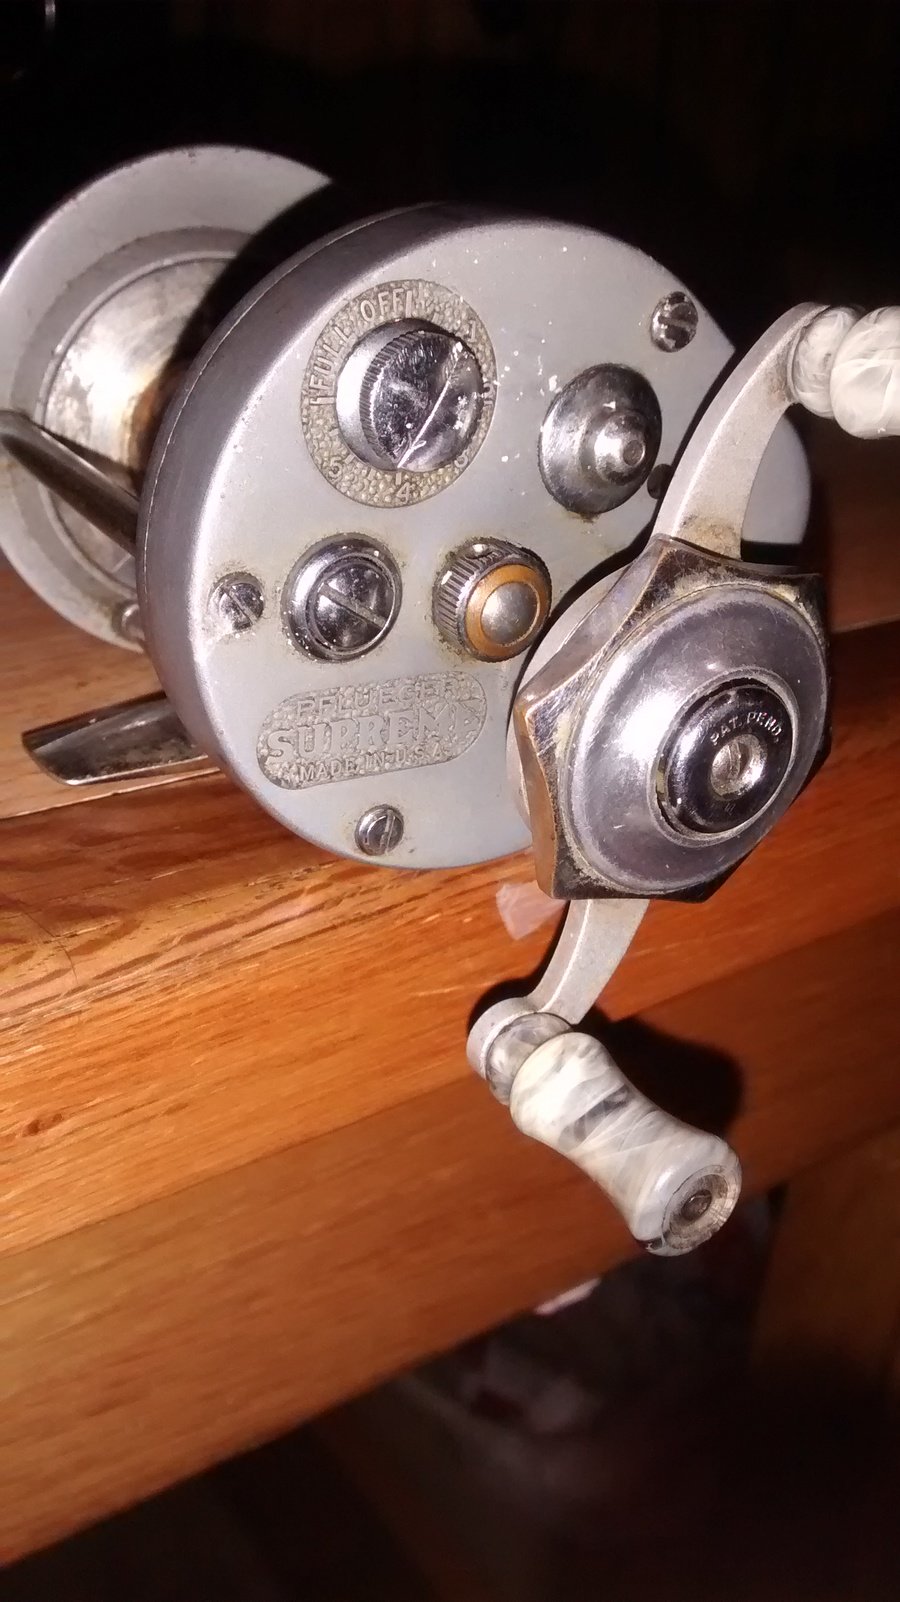 How To Tell What Year This Pflueger Reel Was Made In